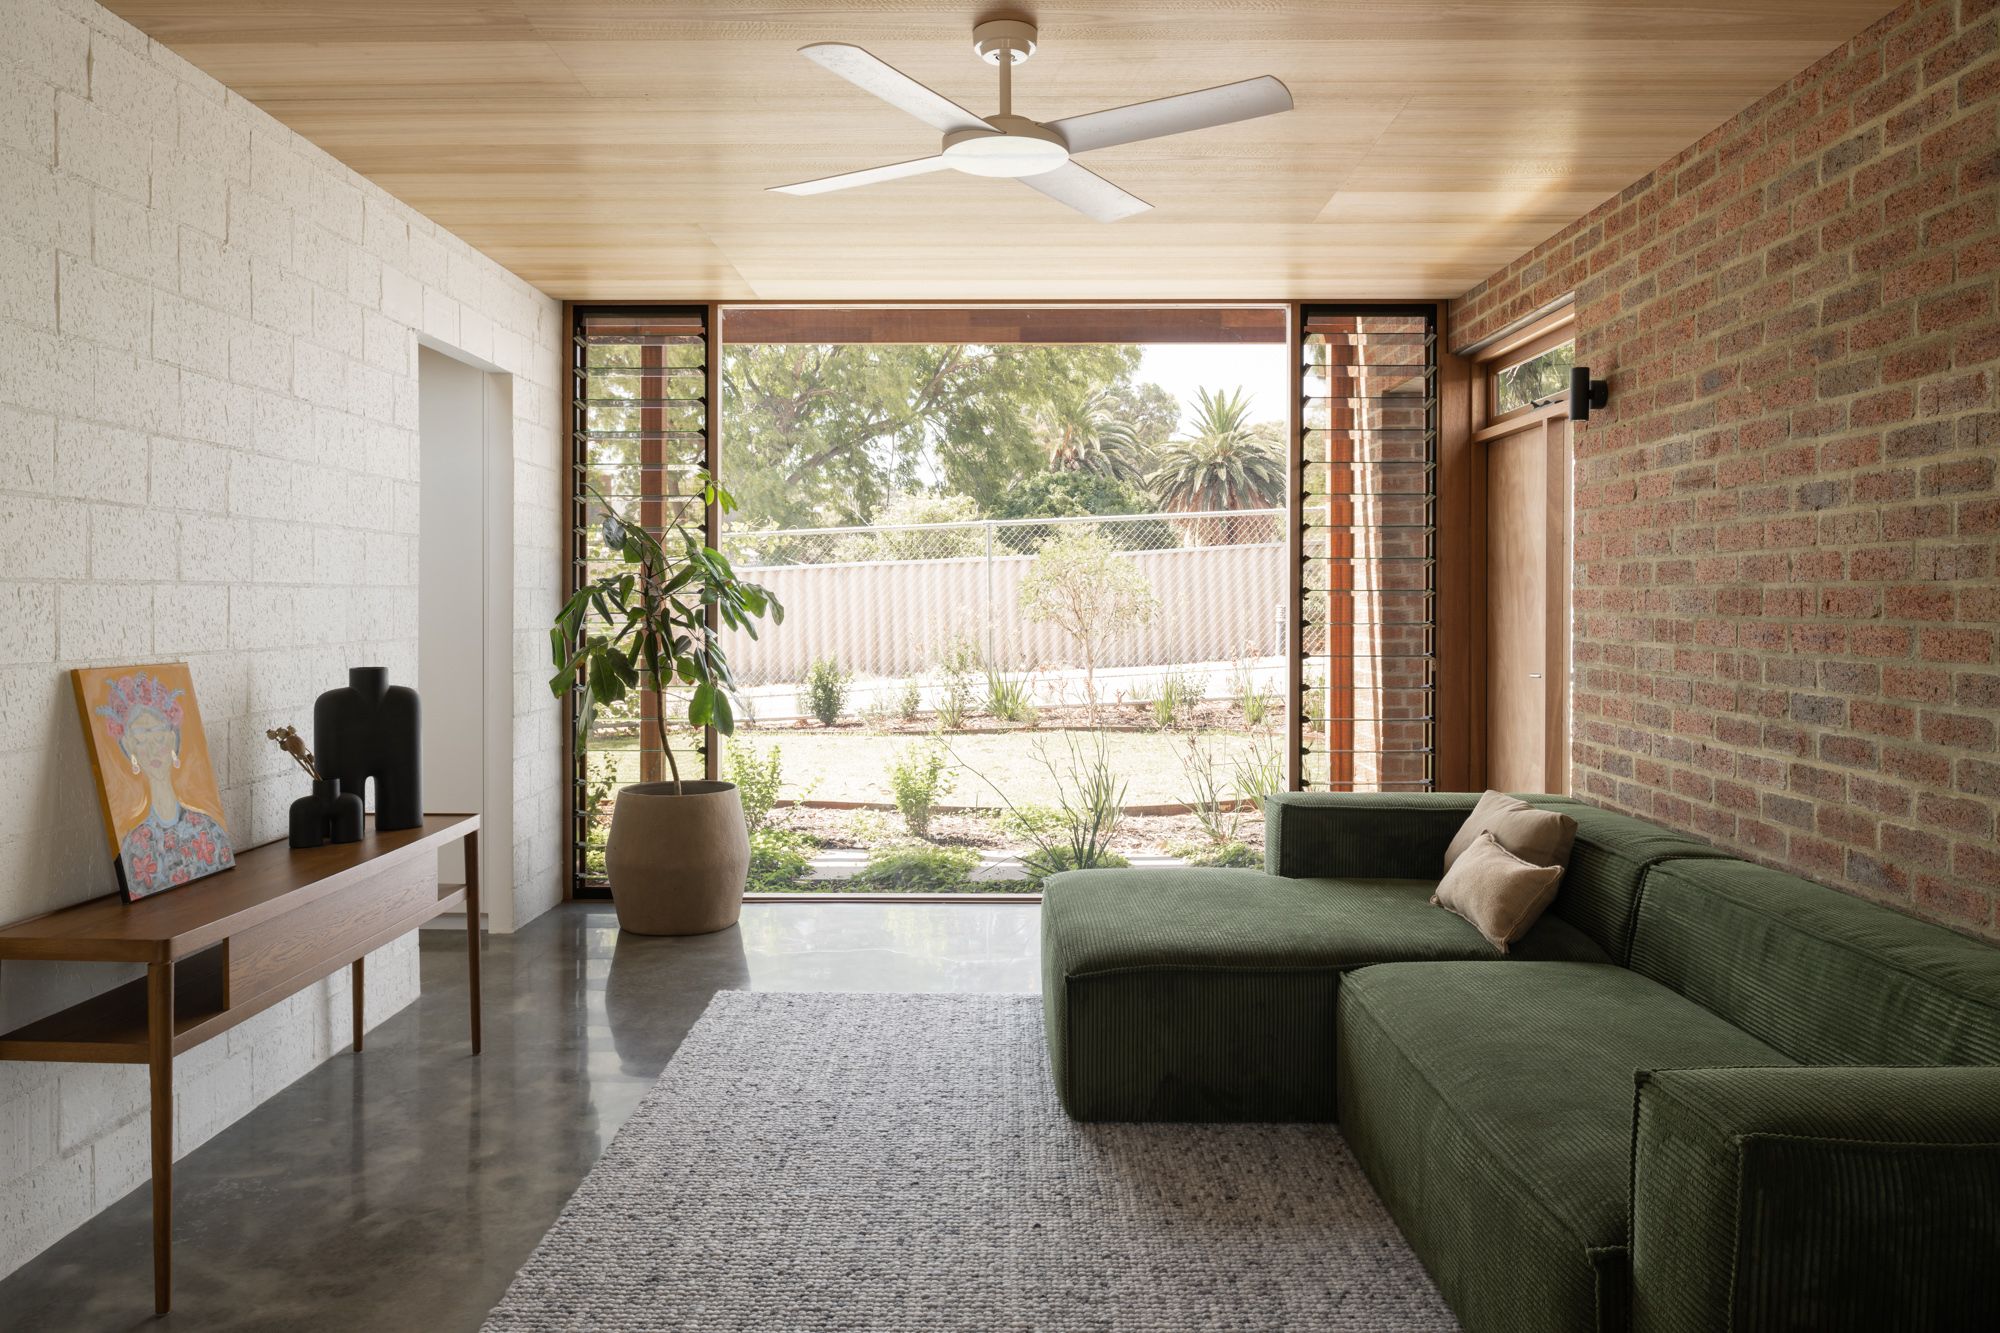 Farrier Lane Home MDC Architects. Brick walled room with polished concrete floors and a timber ceiling. There is a green couch, a timber sideboard and a large potted plant. There is glass plantation shutters opening on to a green backyard. 